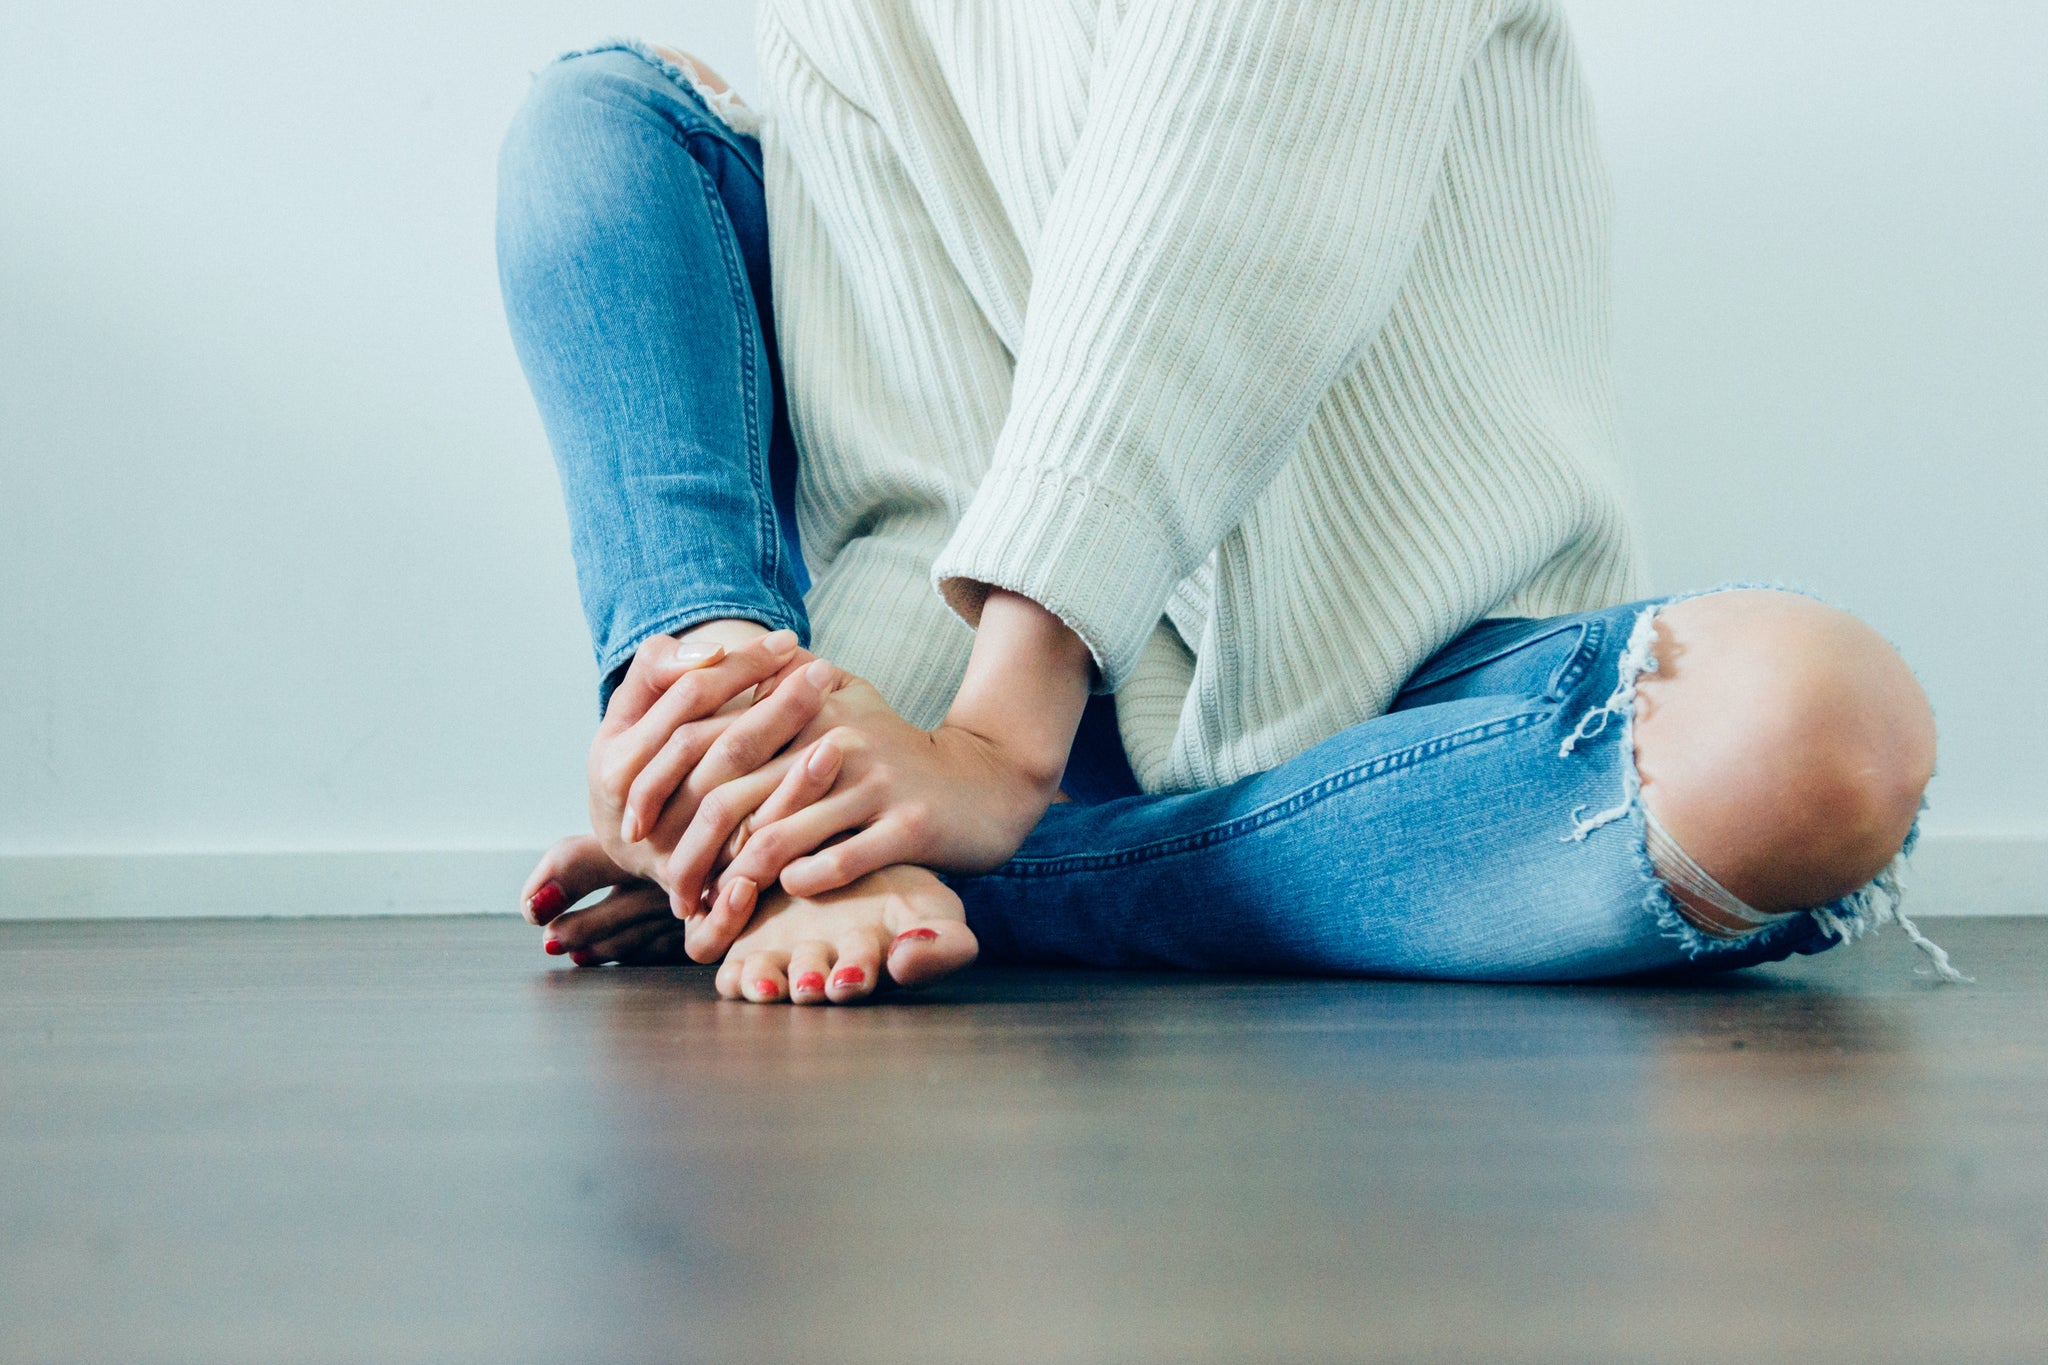 PCOS diagnosis: person sat on floor holding foot in hands